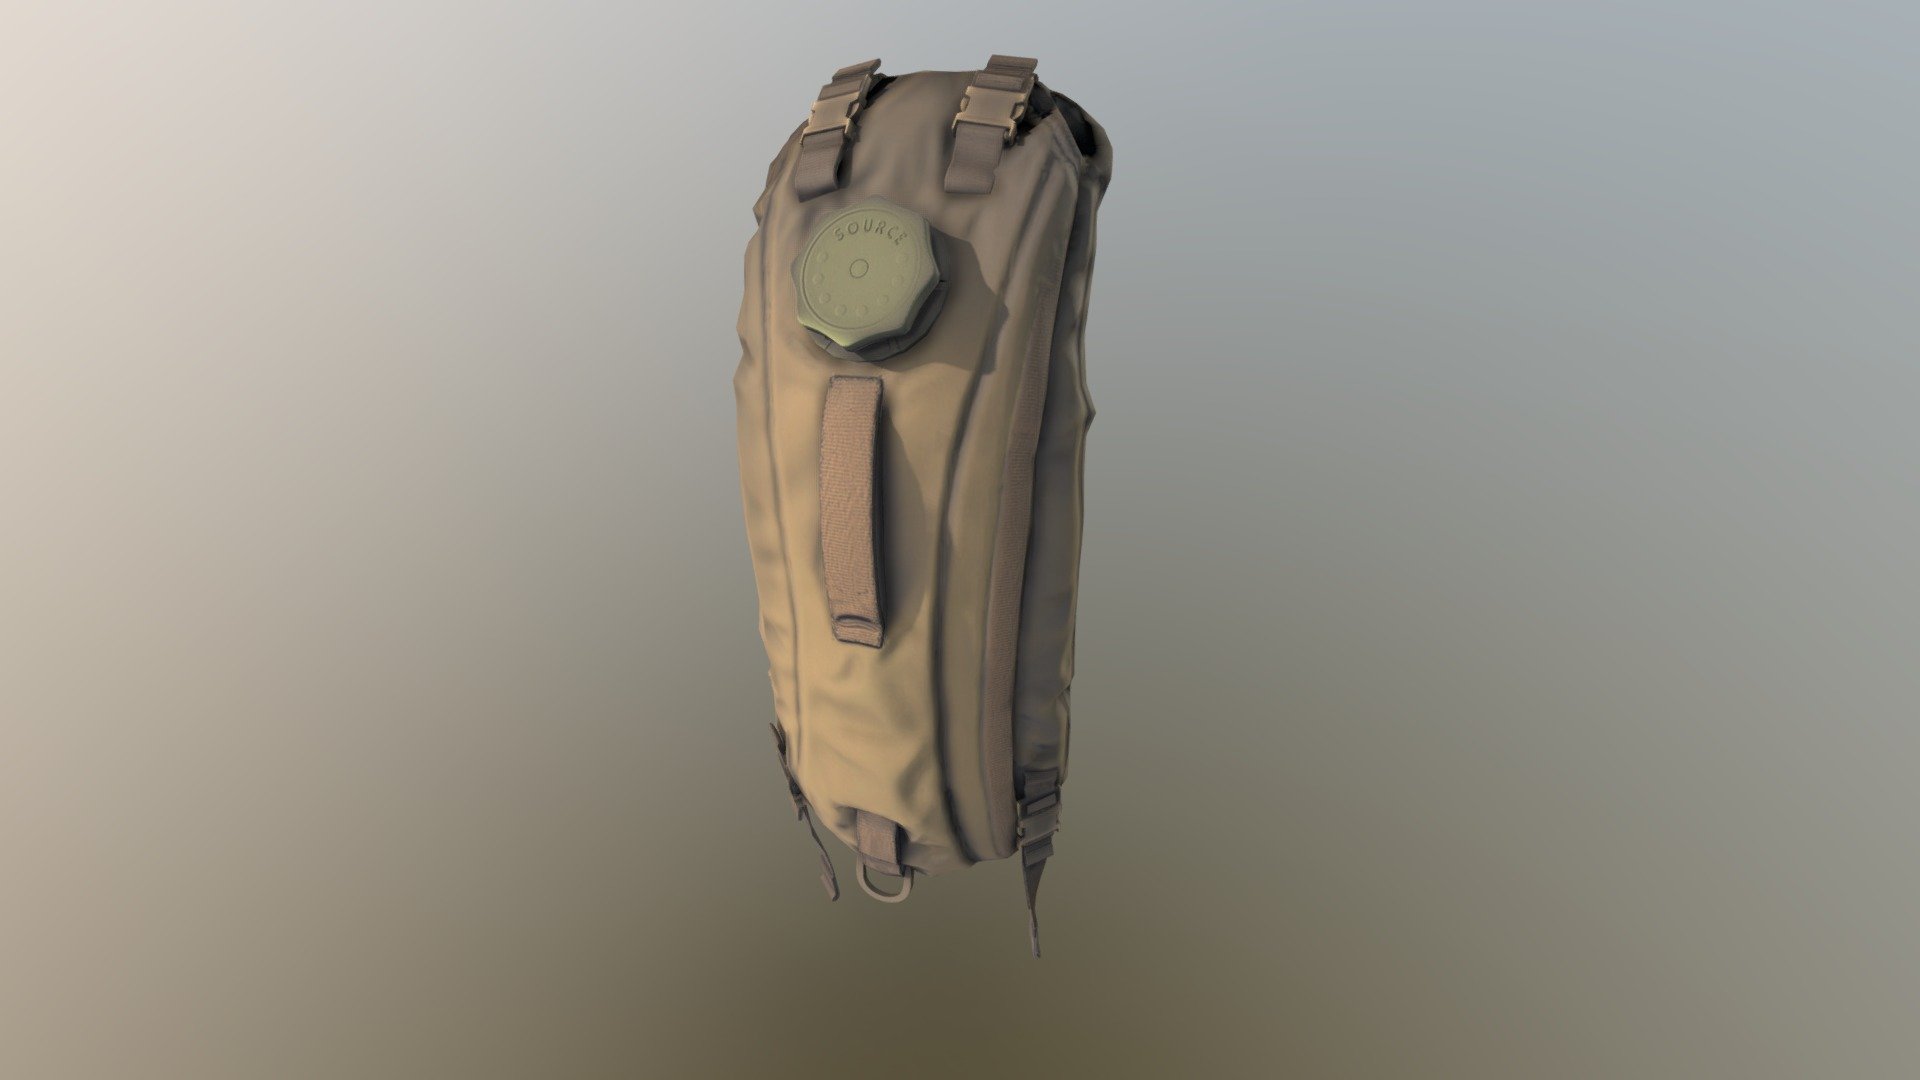 This was an item modeled for the Arma 3 mod RHS, Specifically their USAF Marines unit.

Modeled after a provided reference picture from a formers marine issued gear 3d model